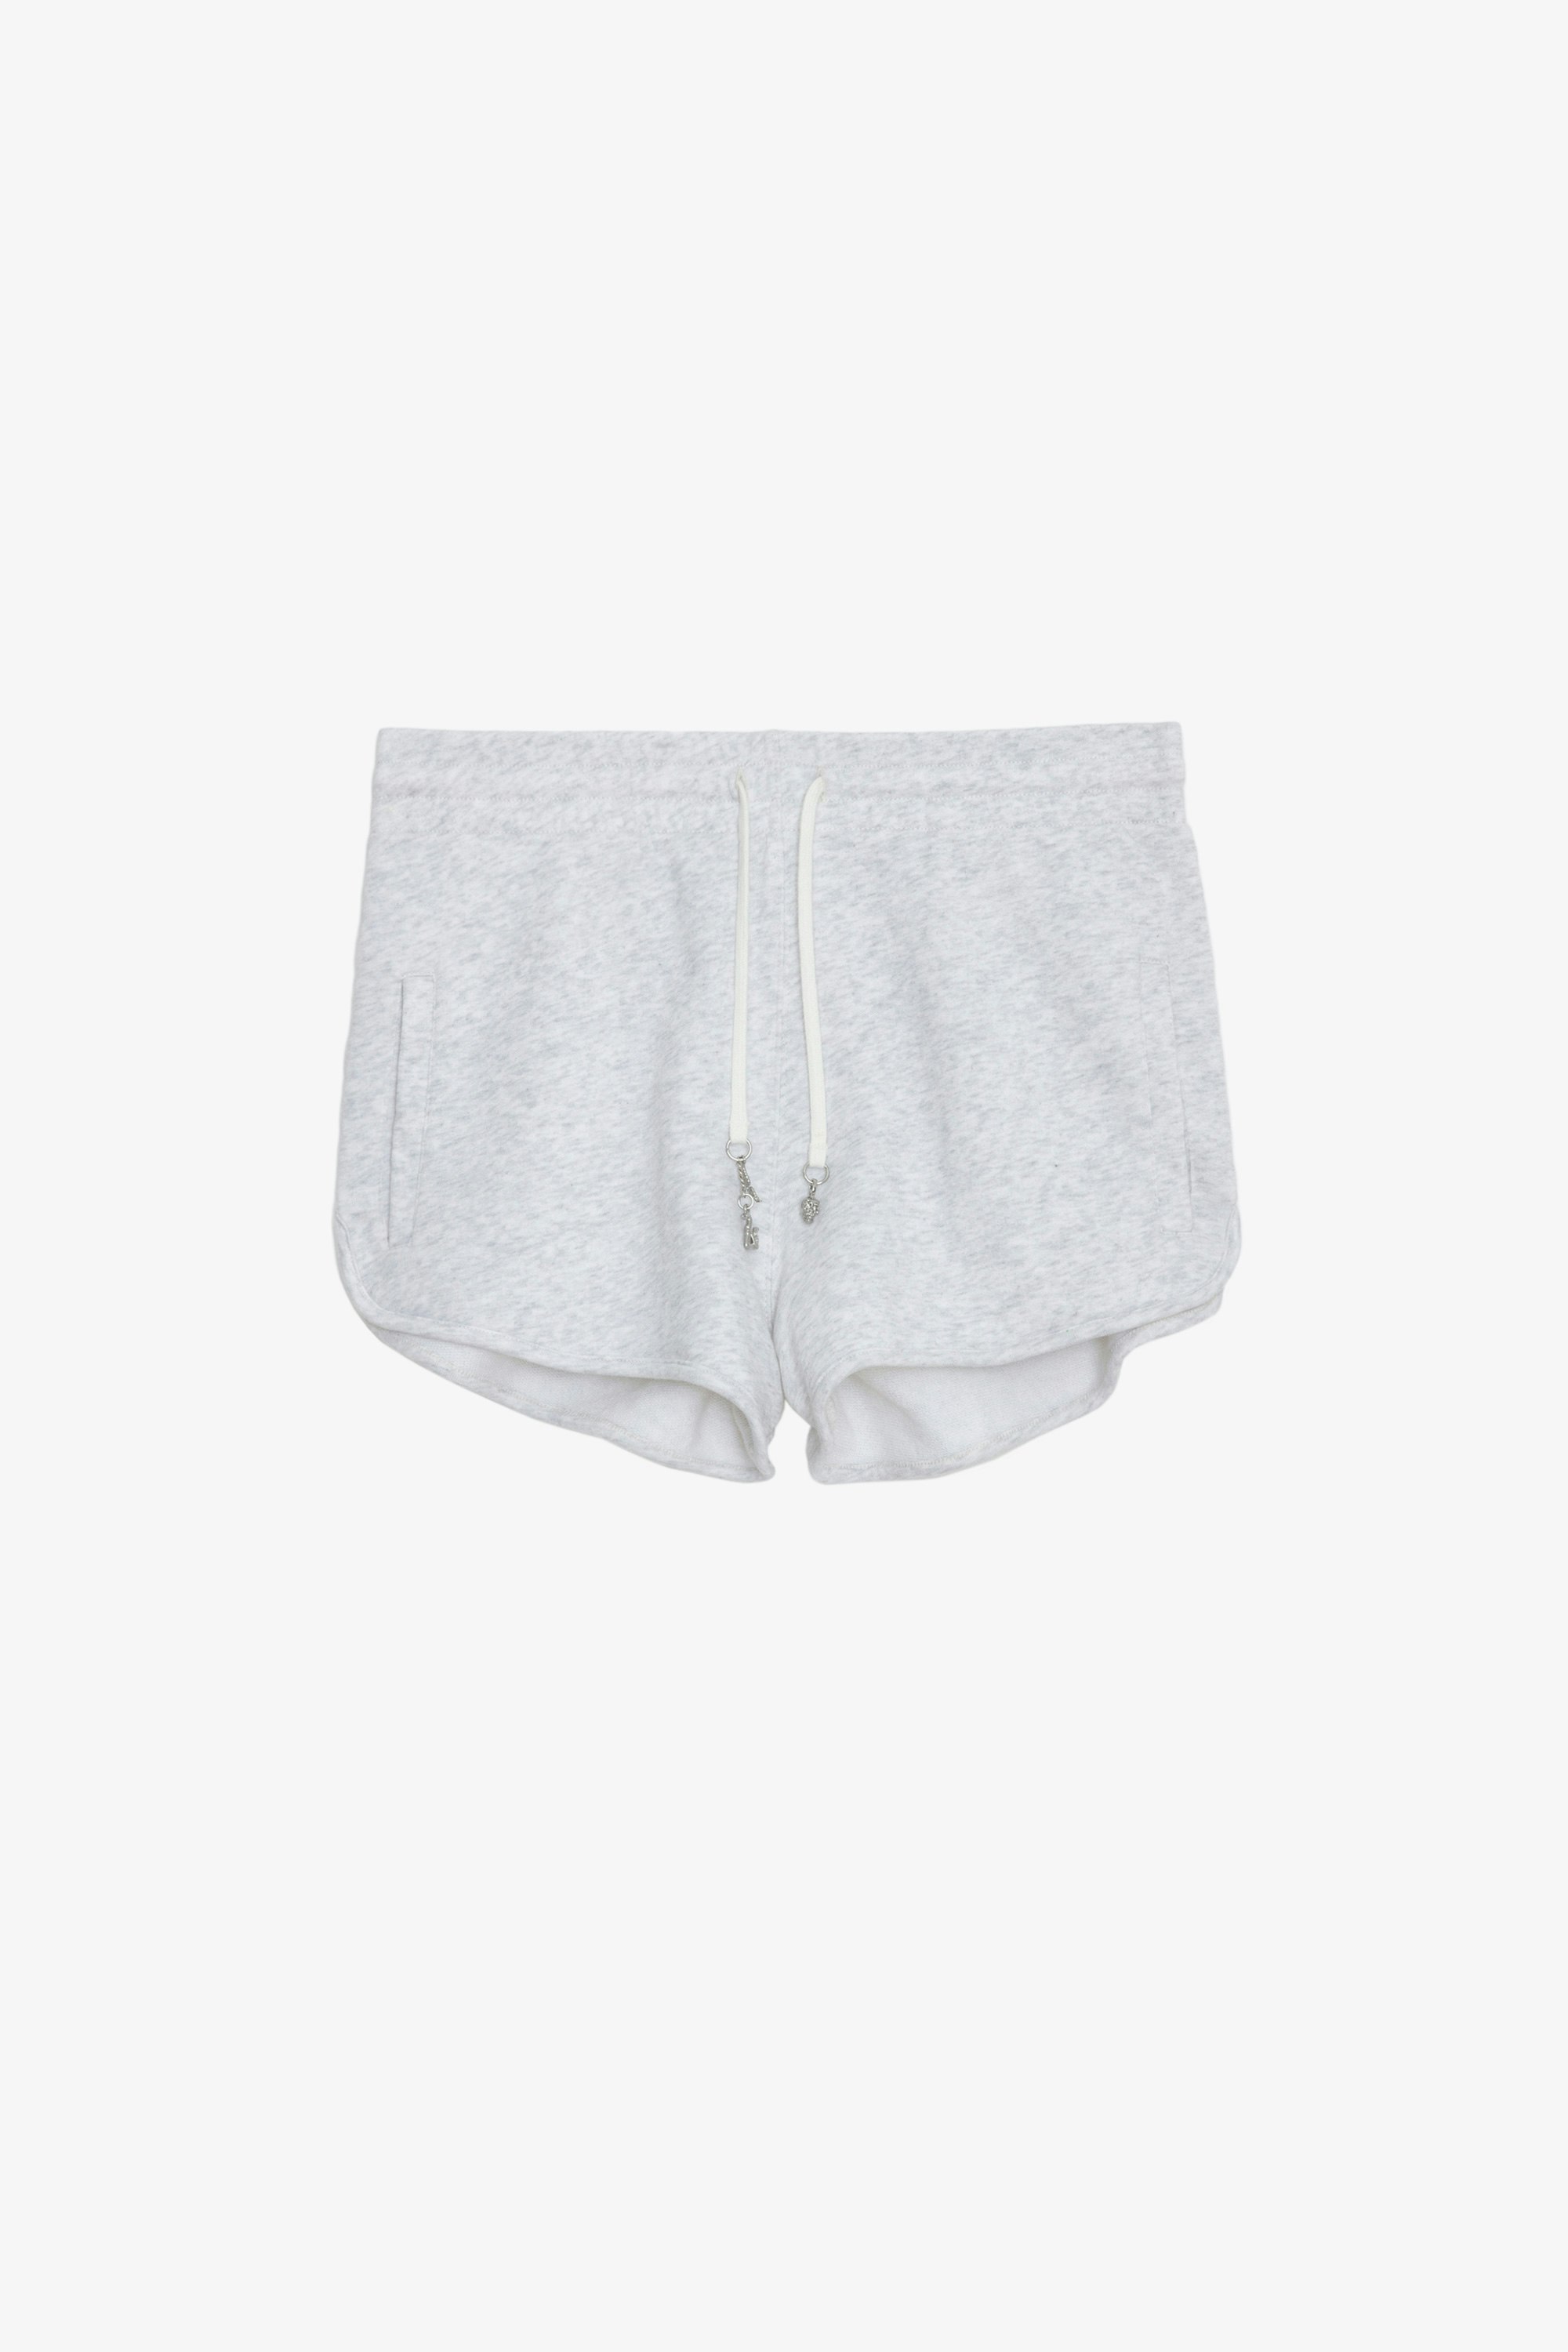 Smile Shorts - Light grey marl cotton shorts with drawstring ties decorated with charms.